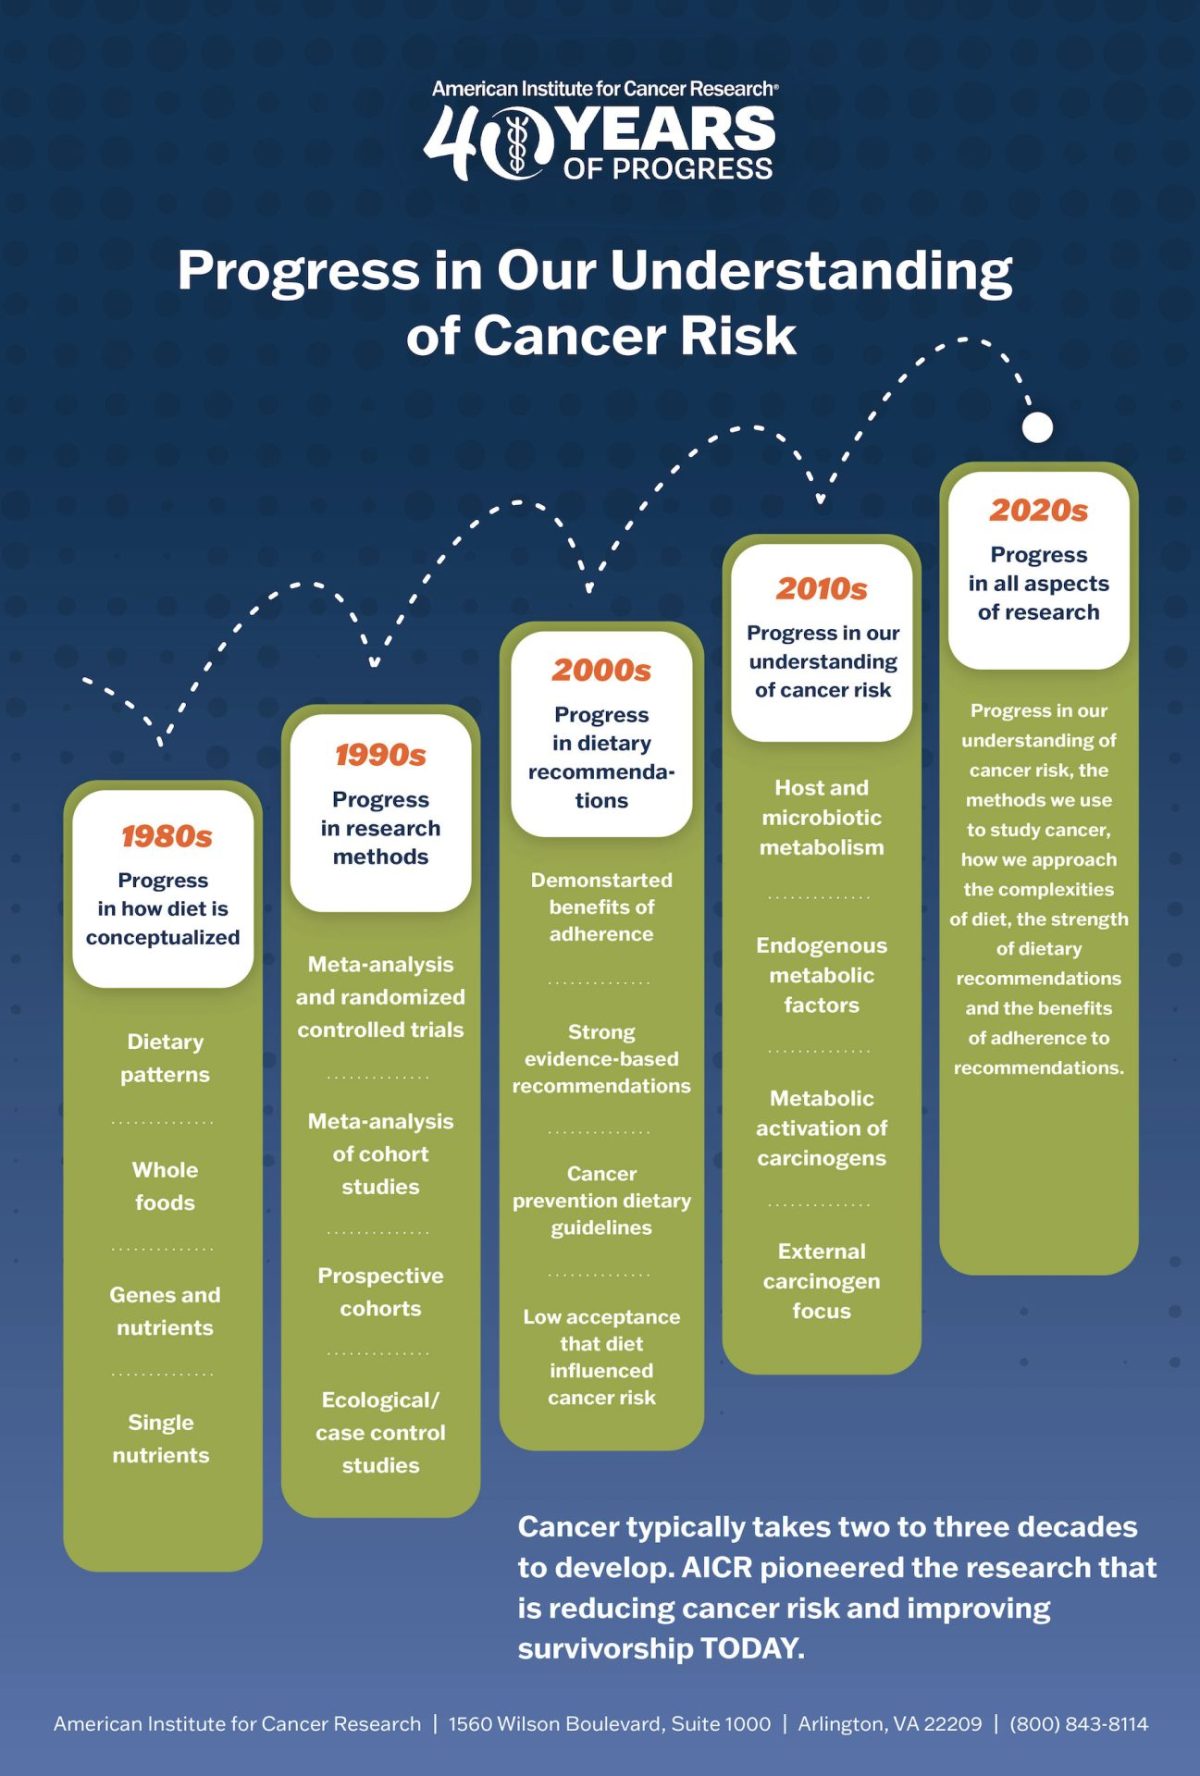 Our understanding of cancer risk